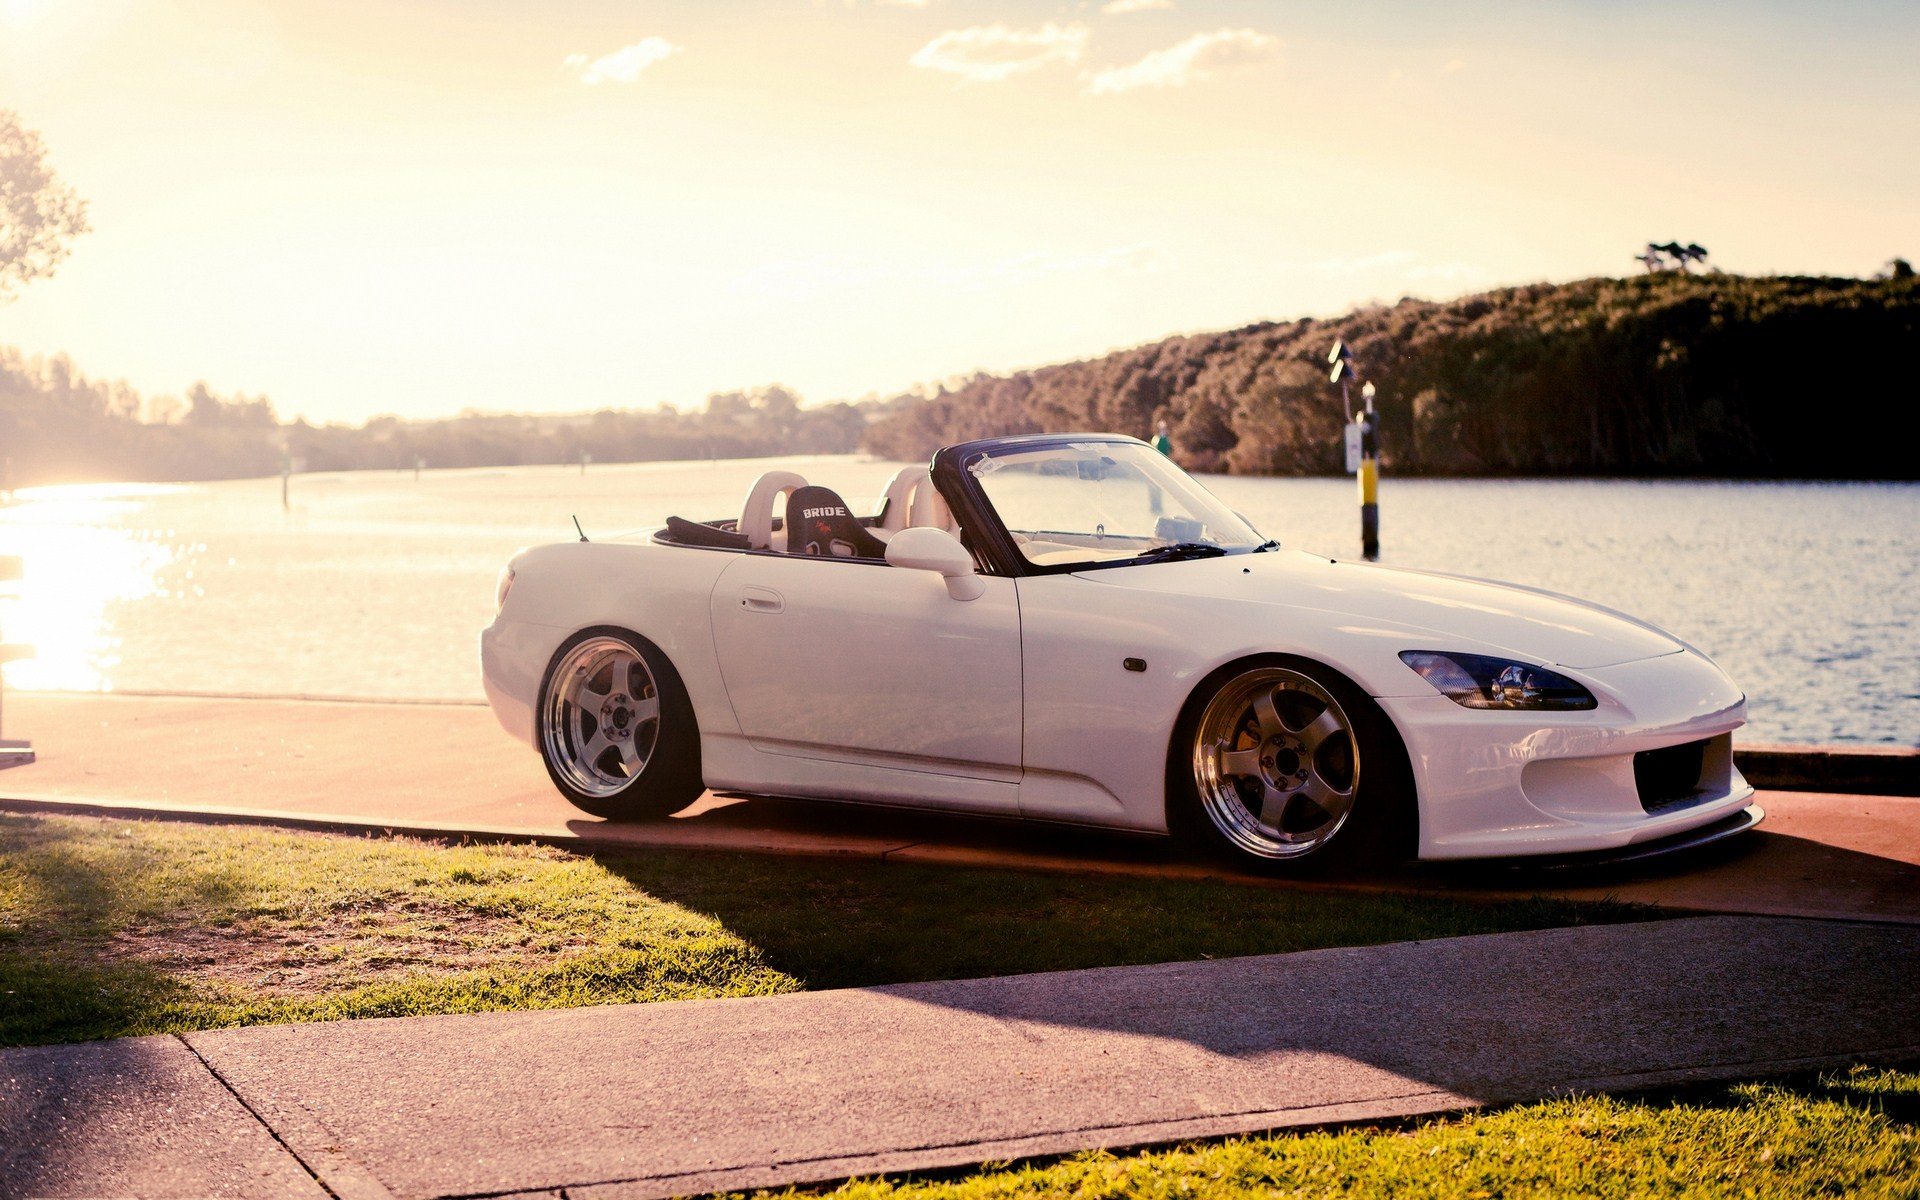 Honda S2000 Modified Wallpaper Image Amp Pictures Becuo